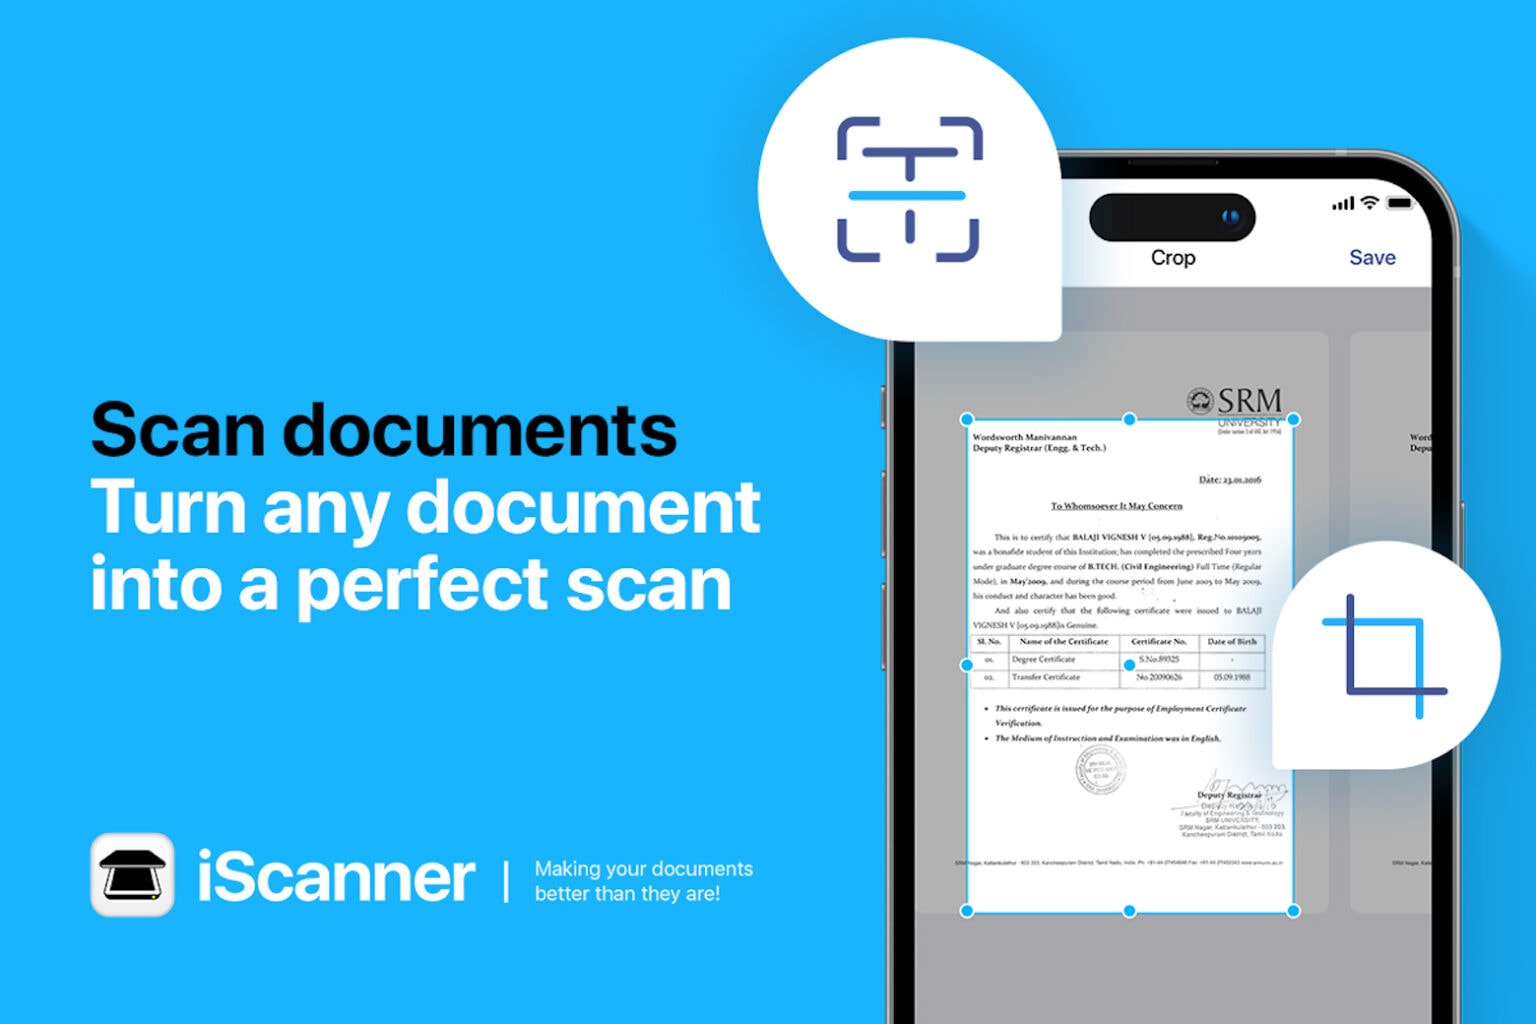 Save $20 on lifetime access to iScanner and handle important documents while on the move.